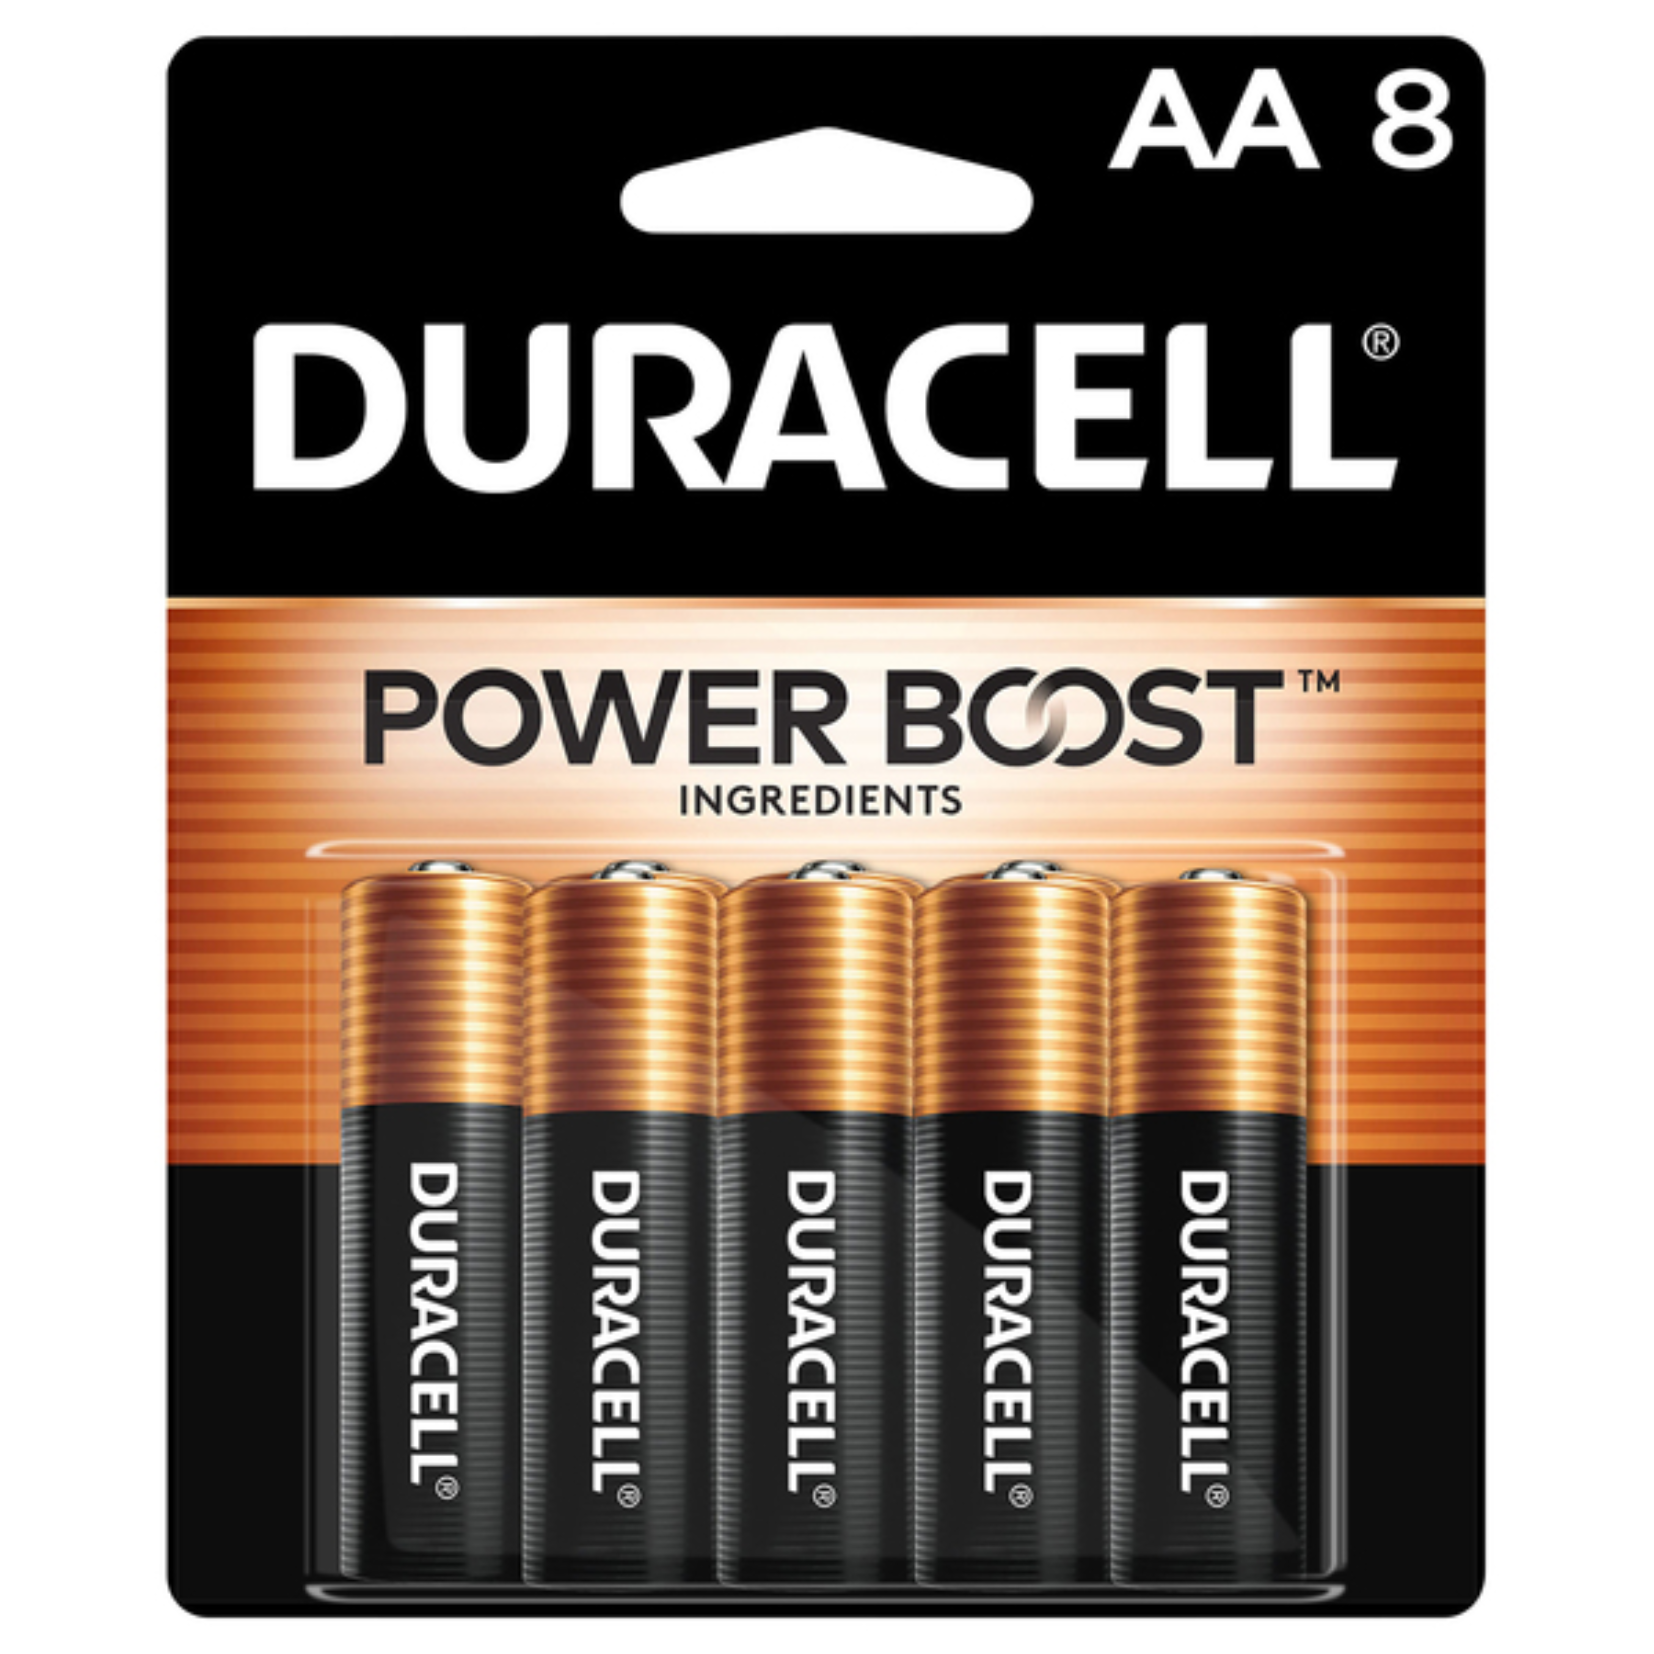 Duracell Power Boost AA 8ct